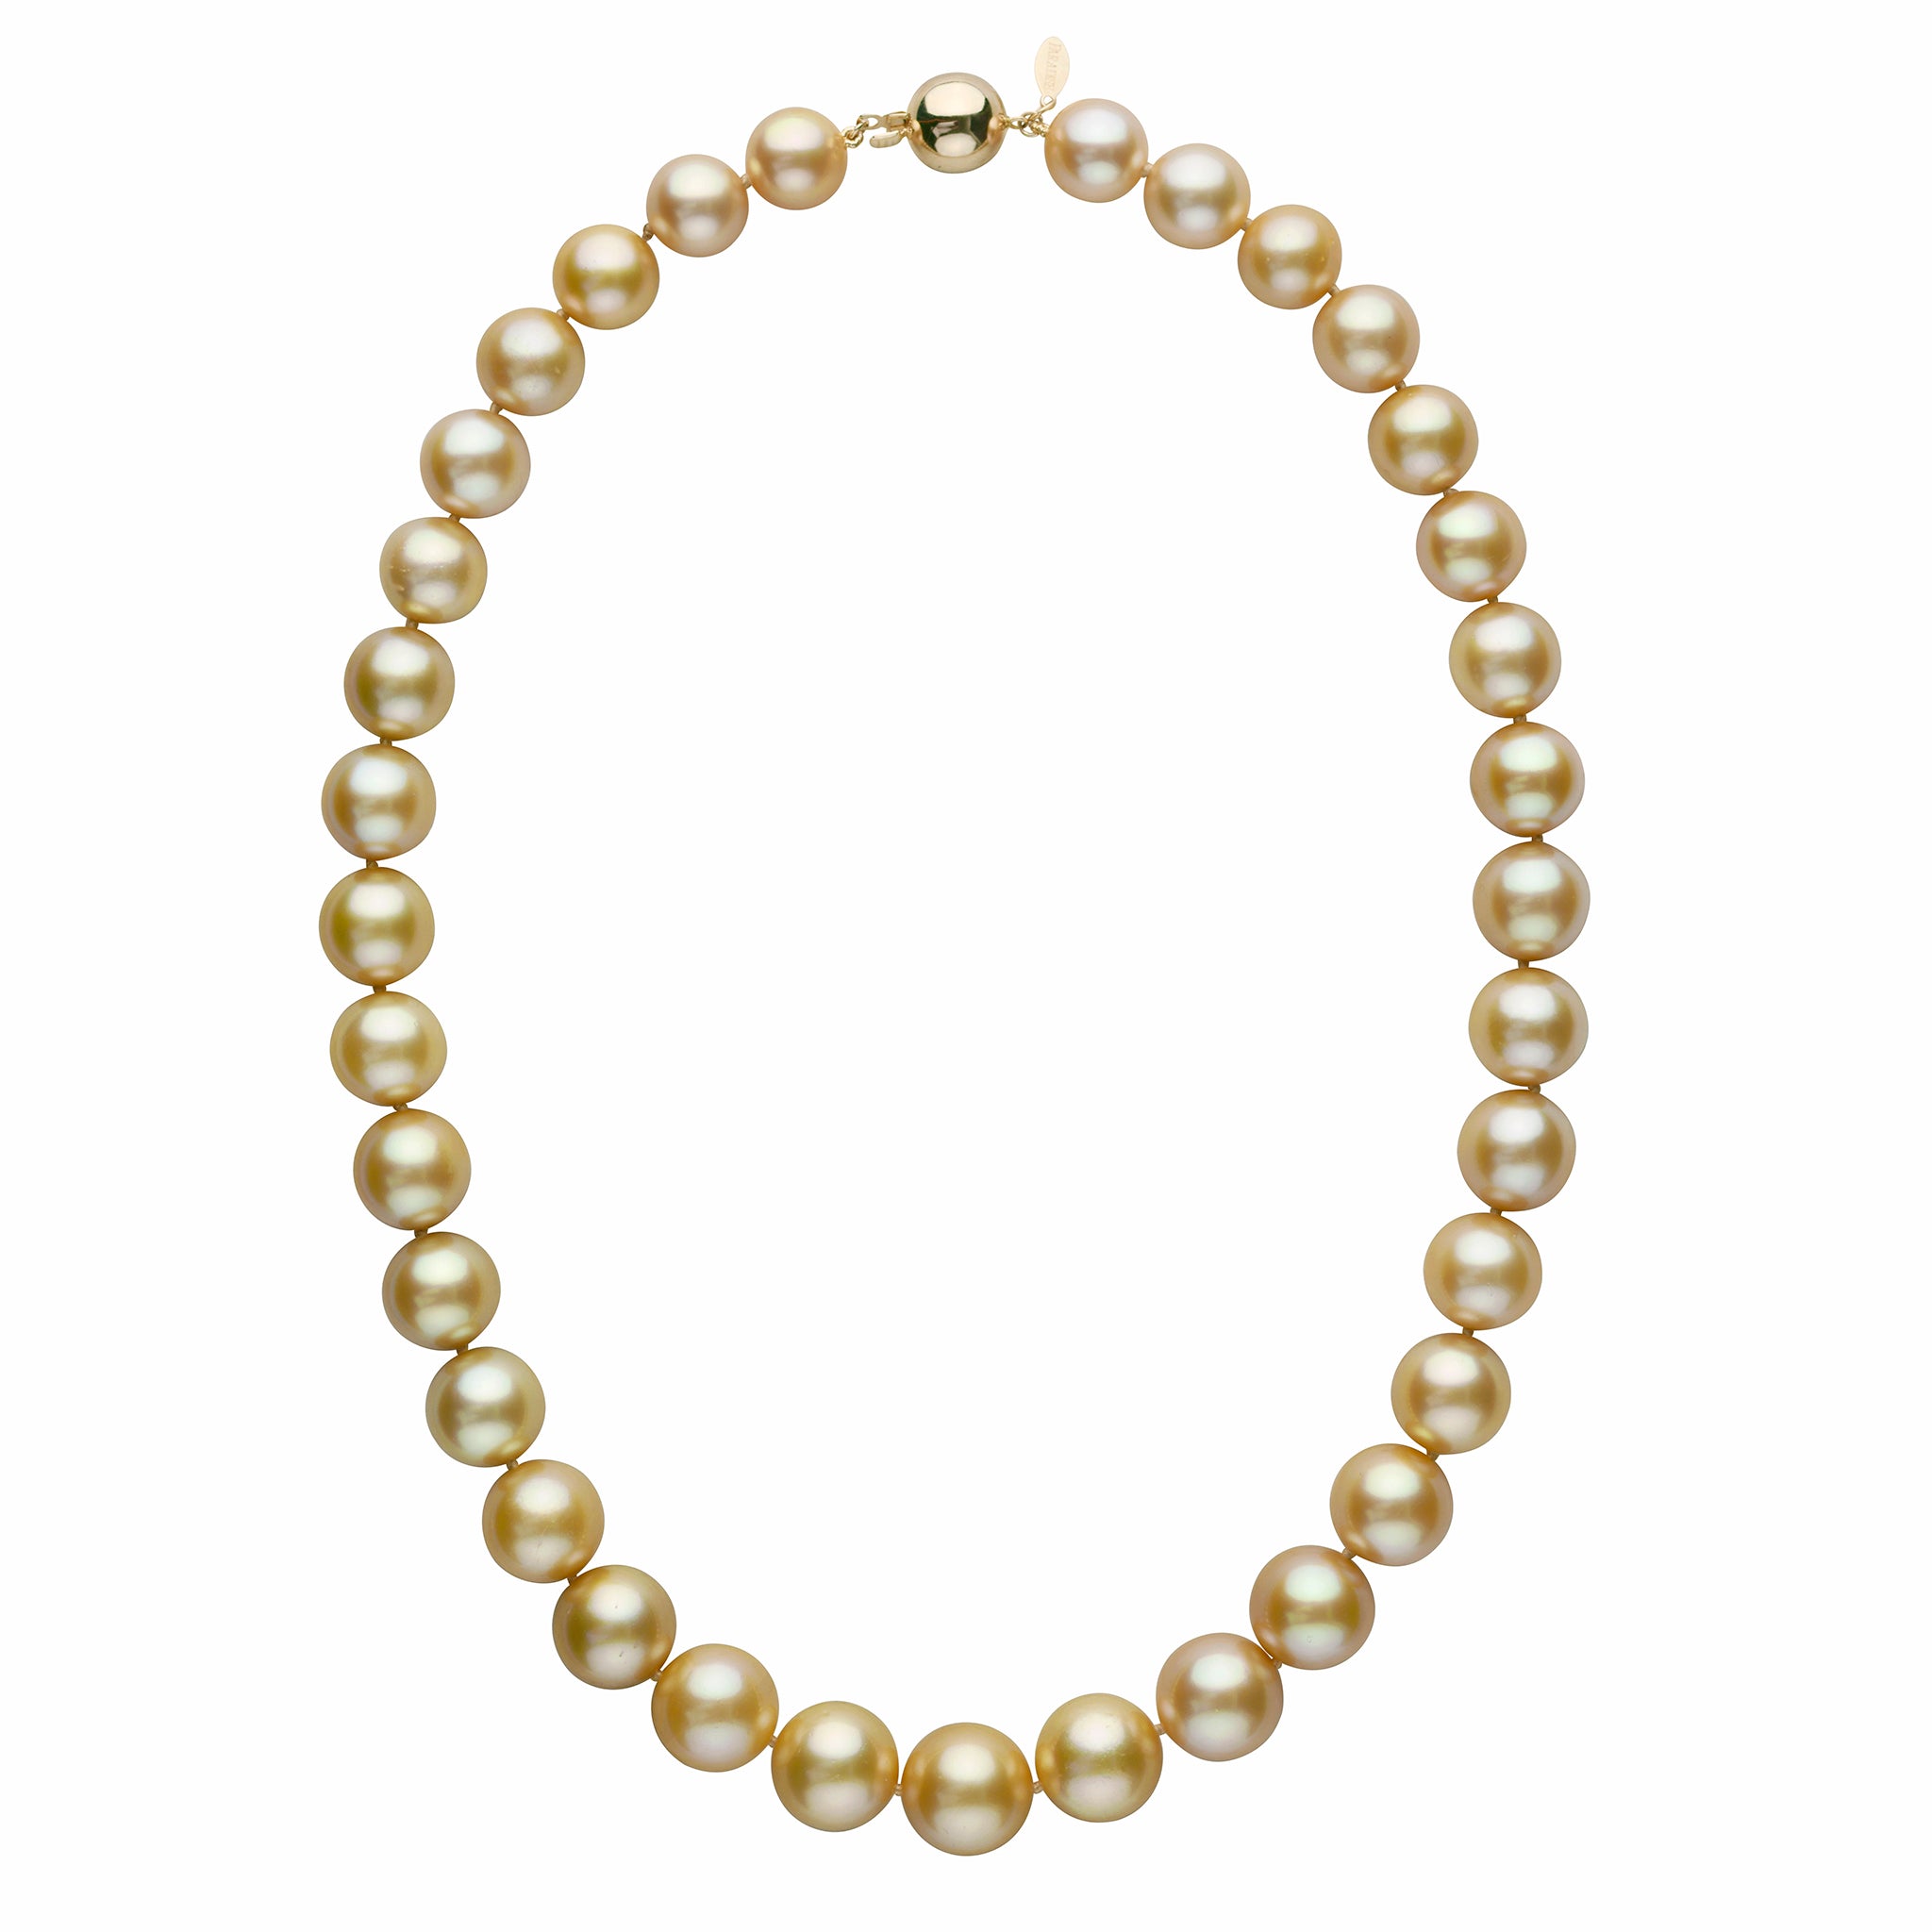 11.1-14.2 mm AA+/AAA Golden South Sea Round Pearl Necklace Yellow Gold